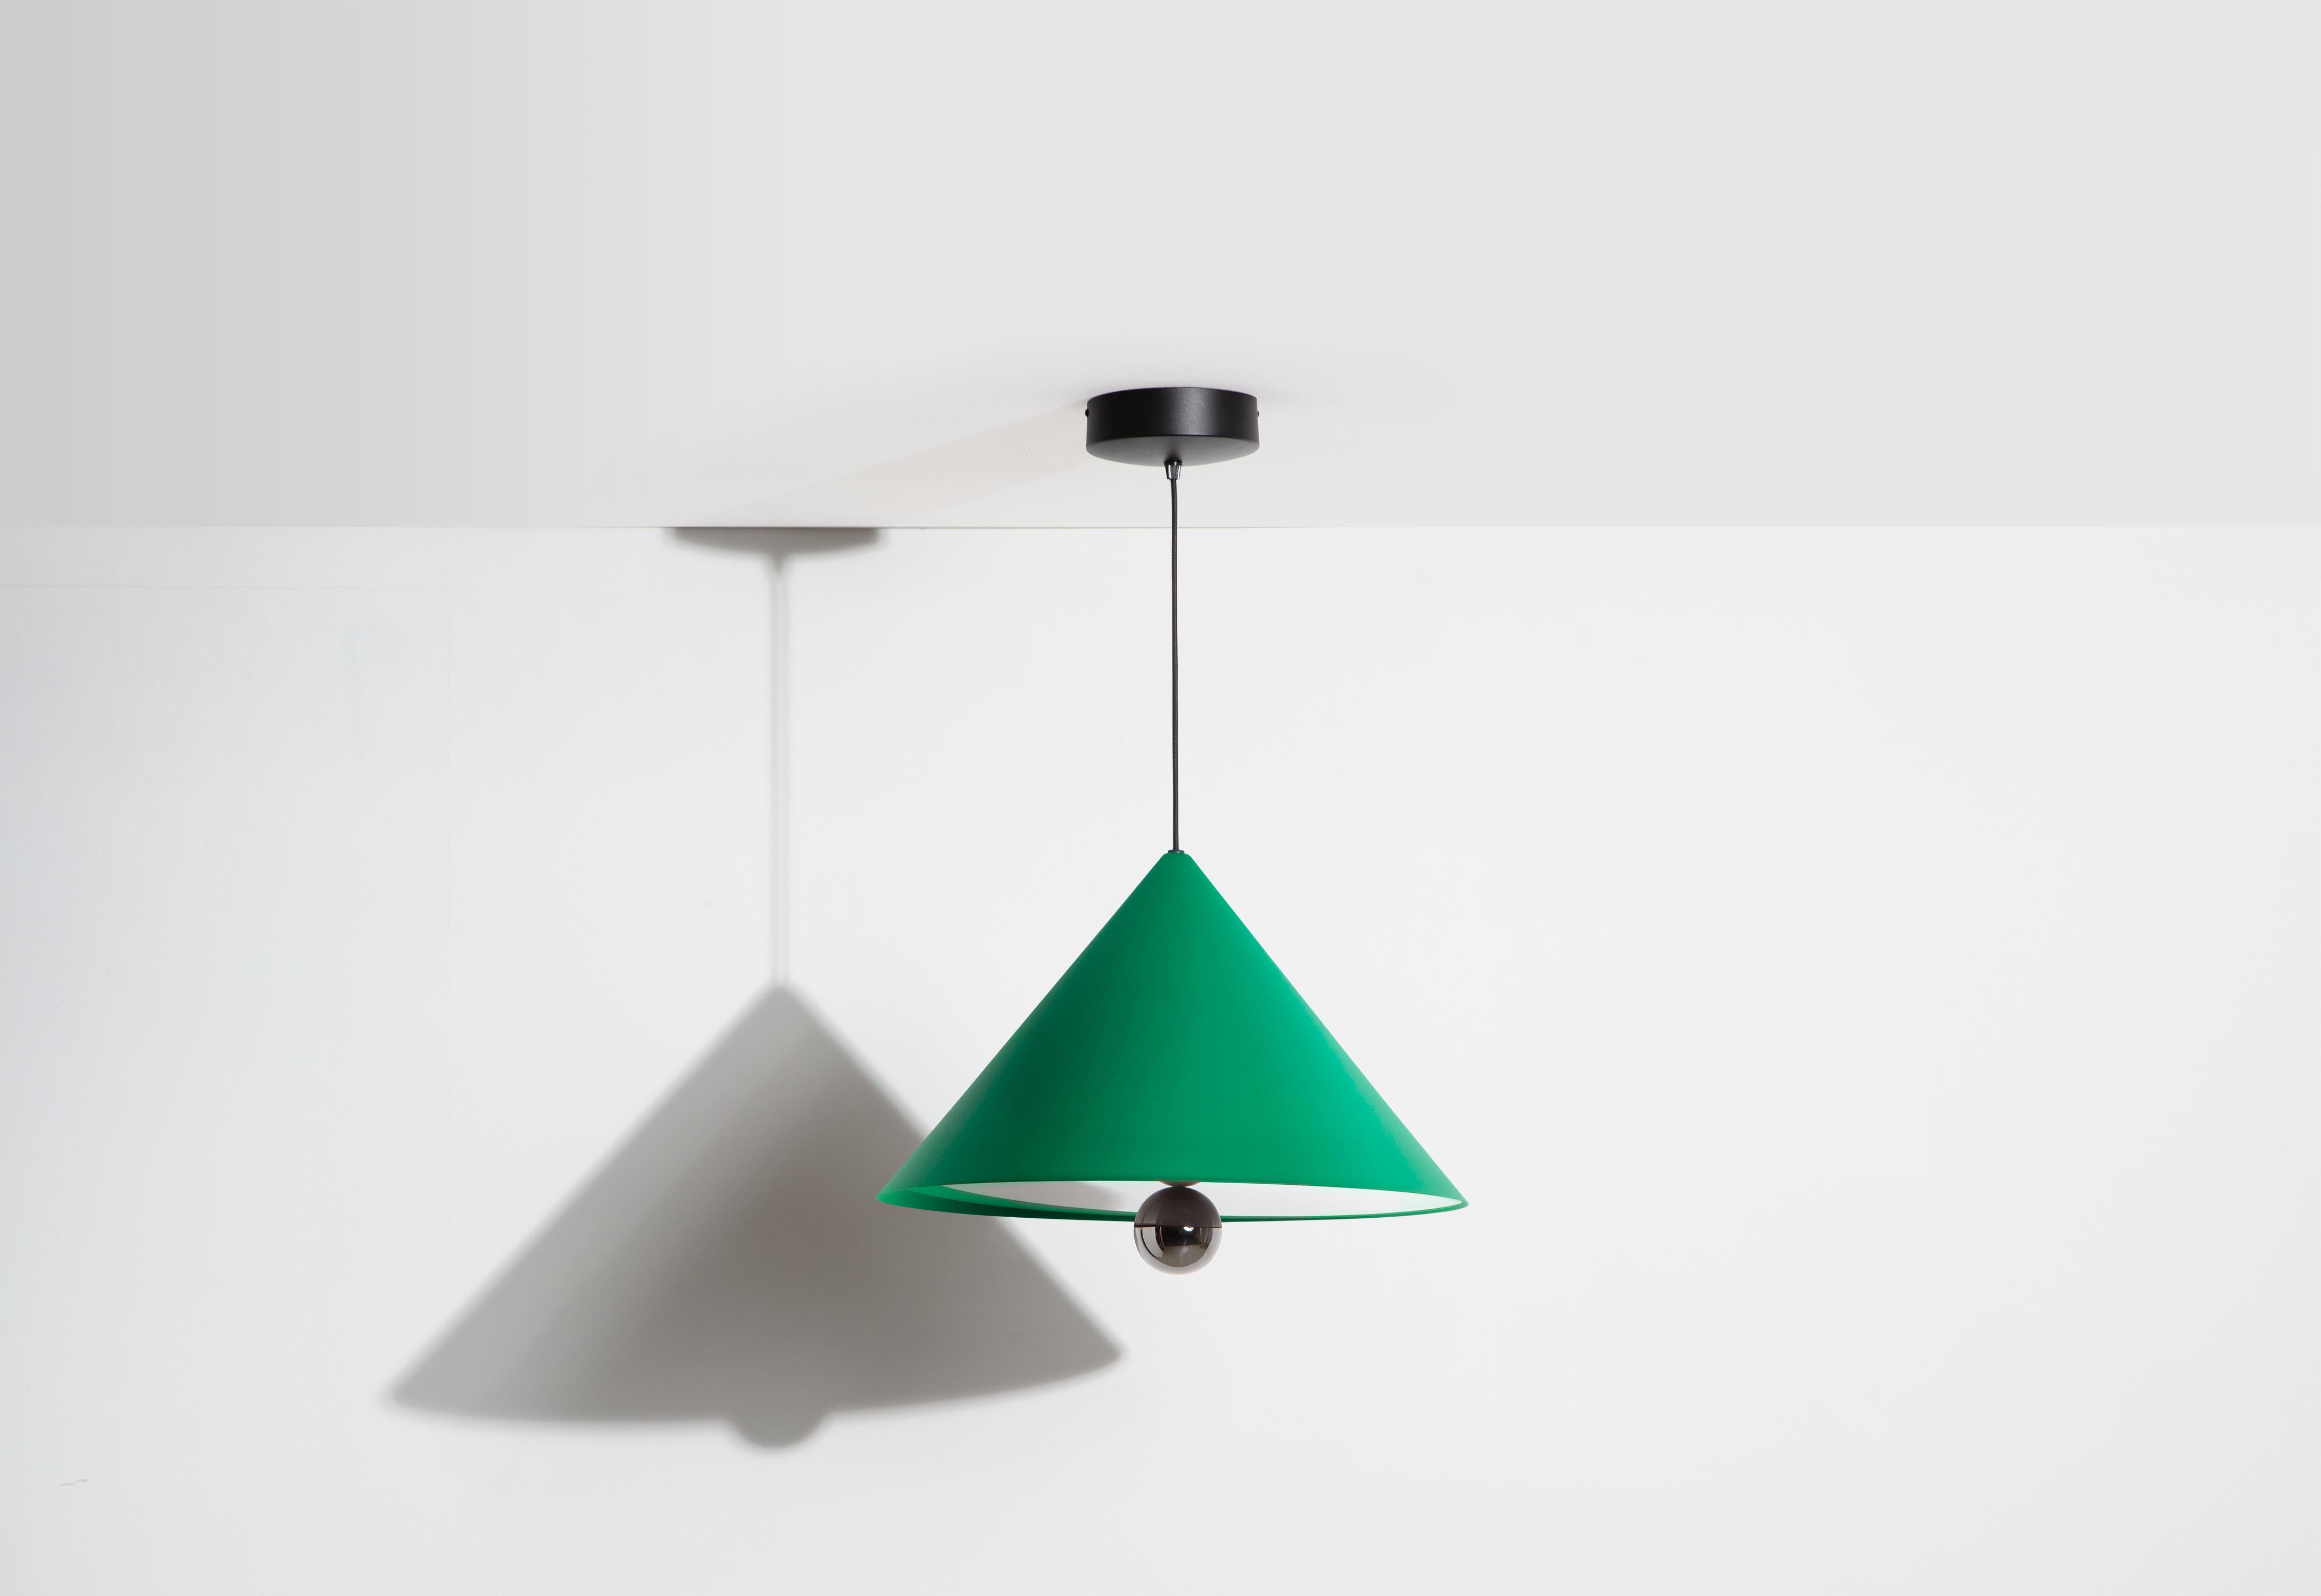 Petite Friture Large Cherry LED Pendant Light in Mint-green & Titanium Aluminium by Daniel and Emma, 2020

In 2015, the Australian duo designers Daniel and Emma signed Cherry a simple and minimalist pendant lamp design ; an aluminum cone with a